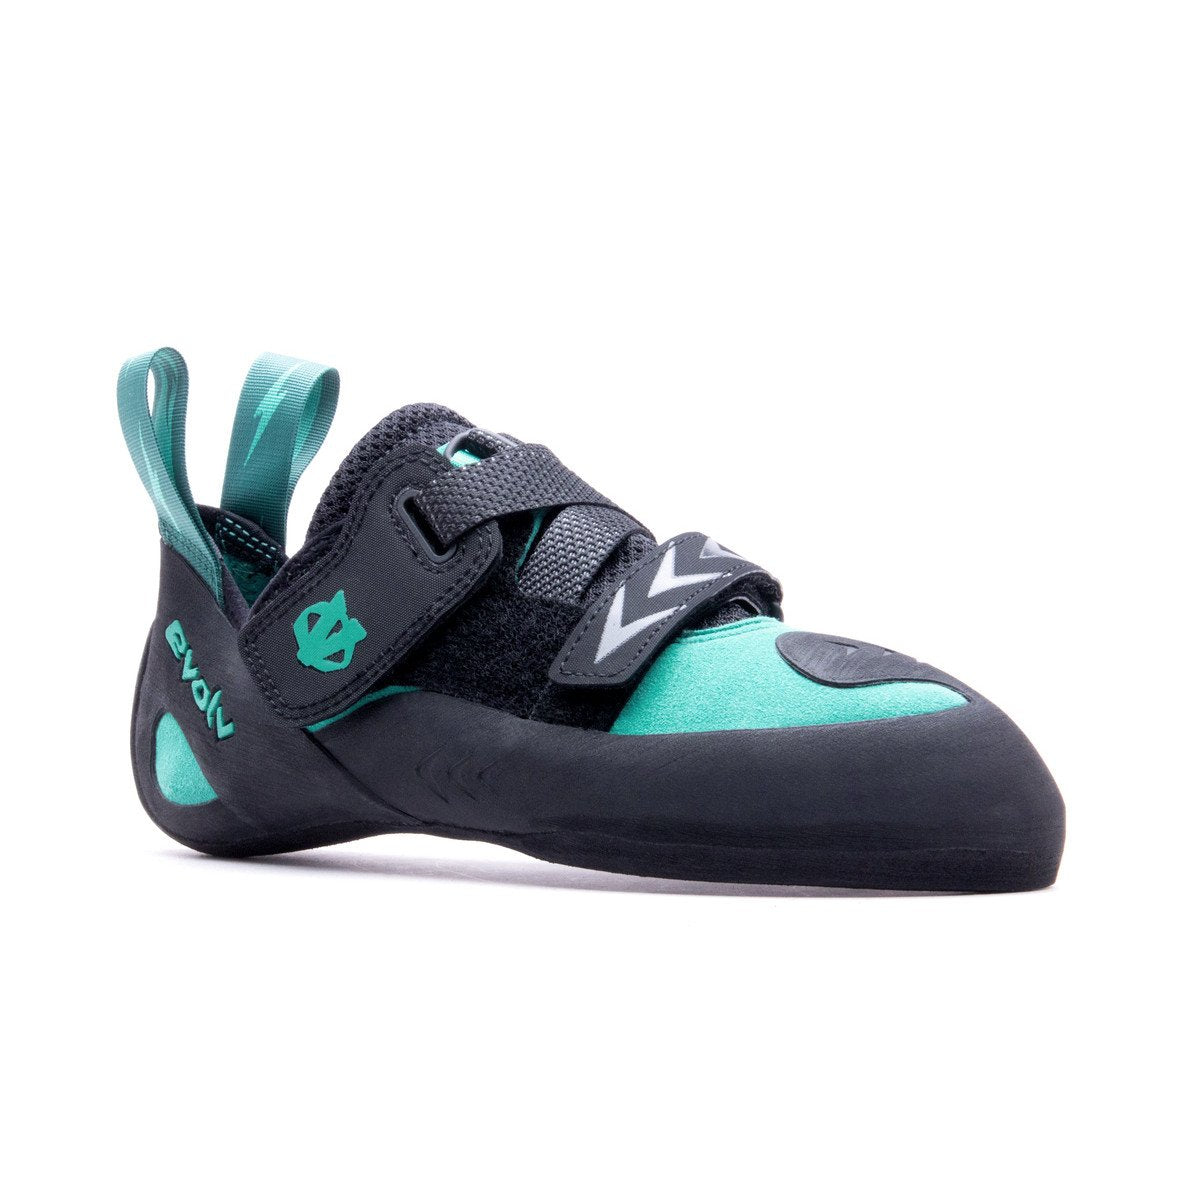 Evolv Kira Womens Climbing Shoe, front/side view in green and black colours